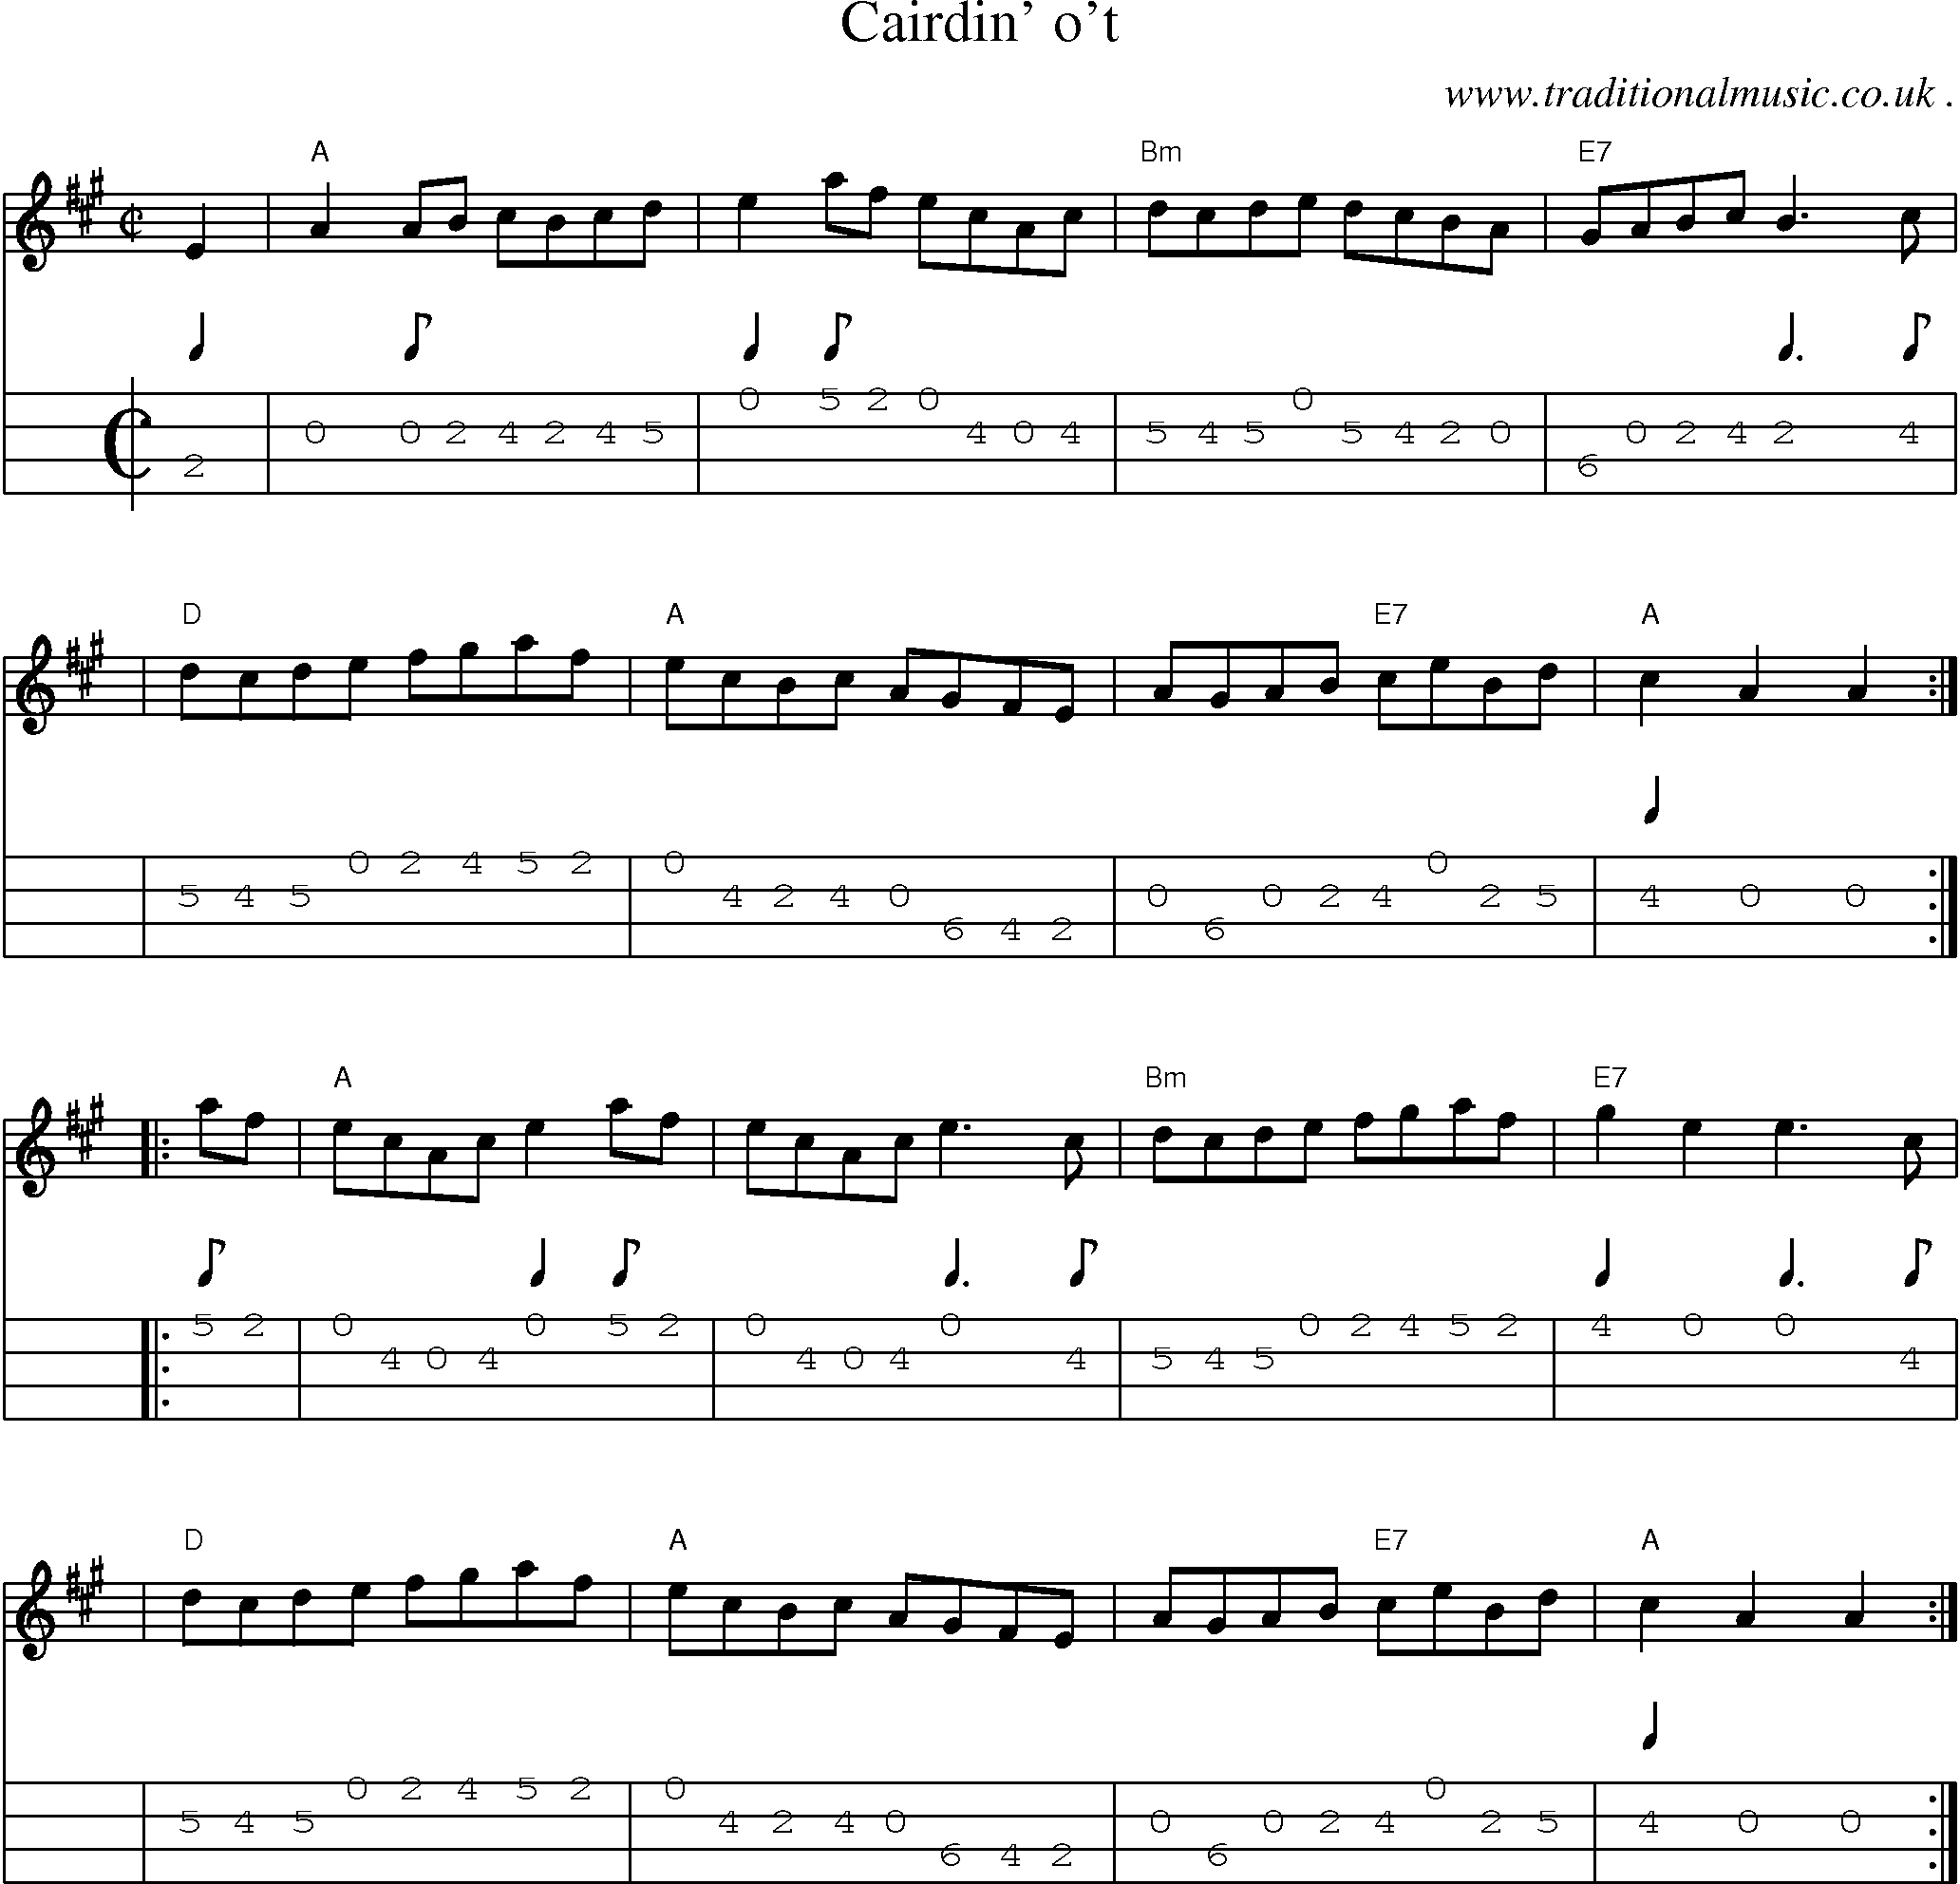 Sheet-music  score, Chords and Mandolin Tabs for Cairdin Ot